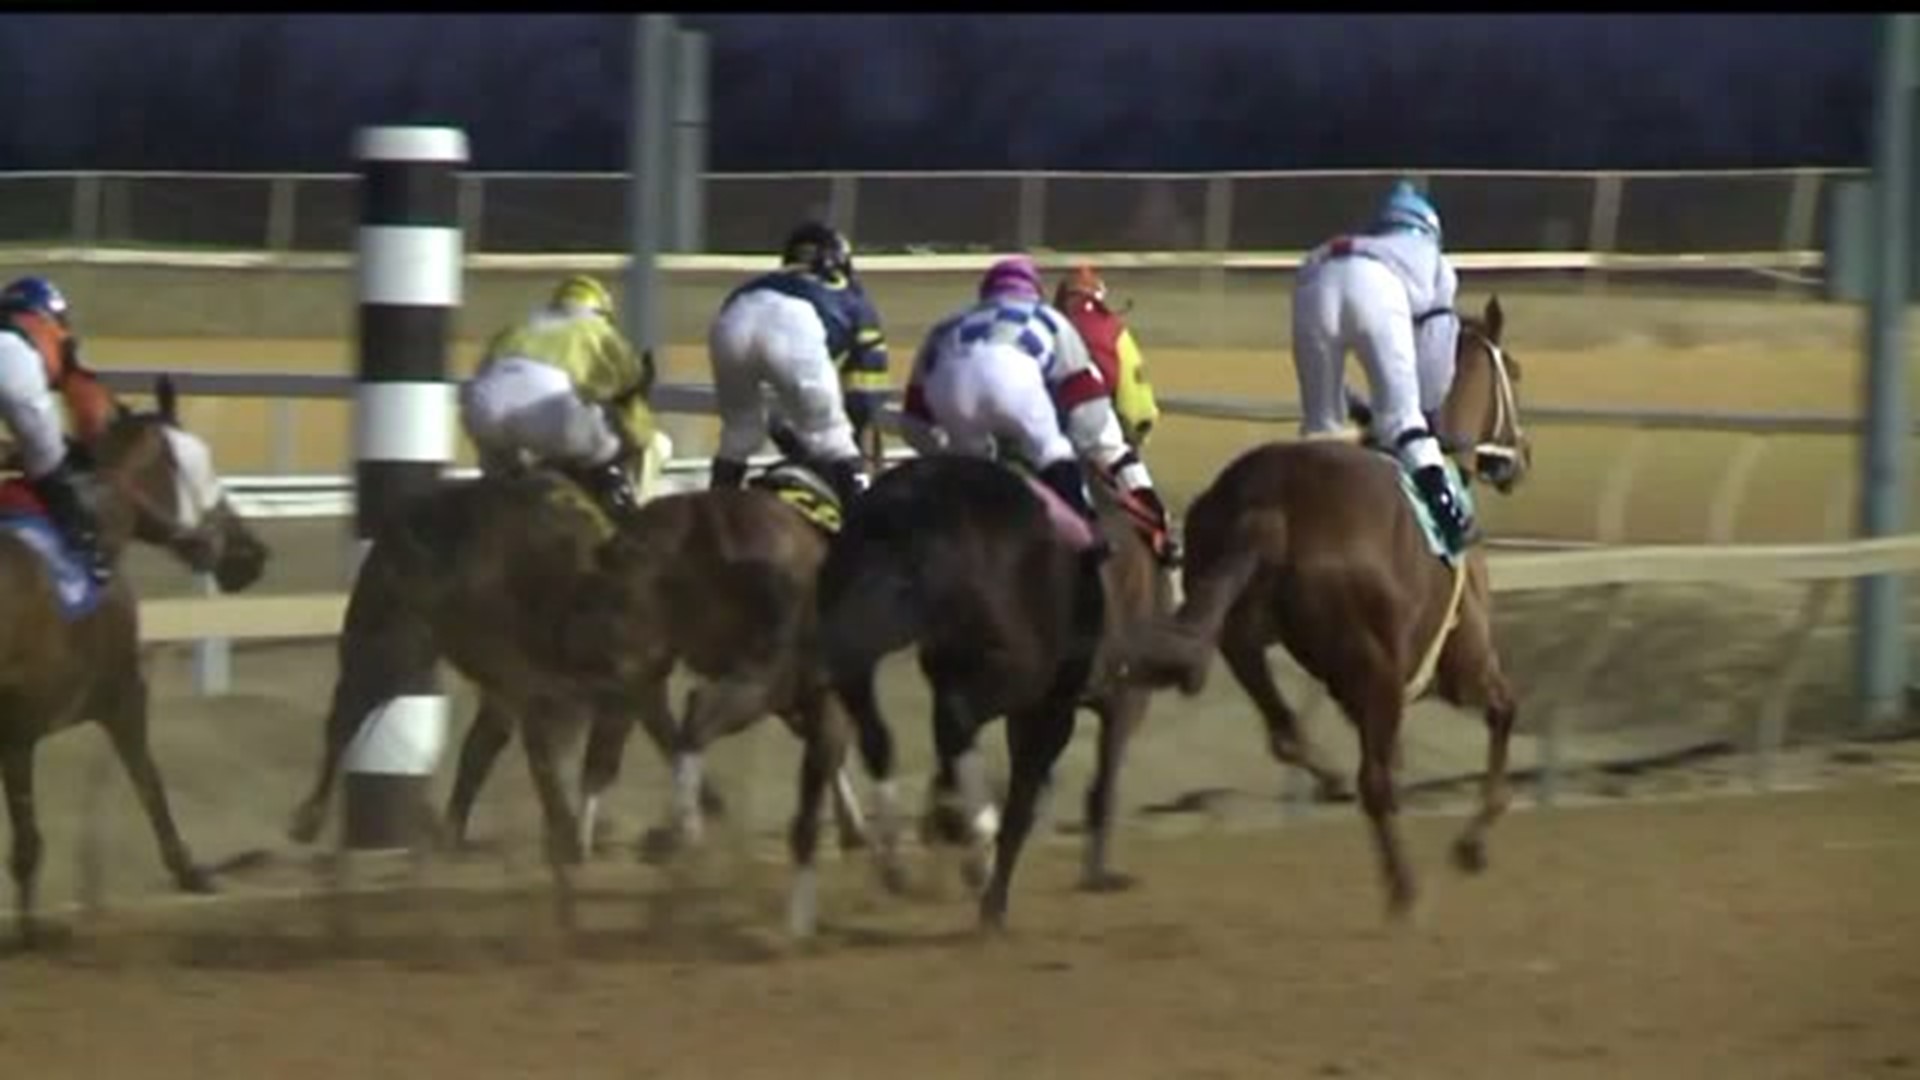 Reform proposed to horse racing industry